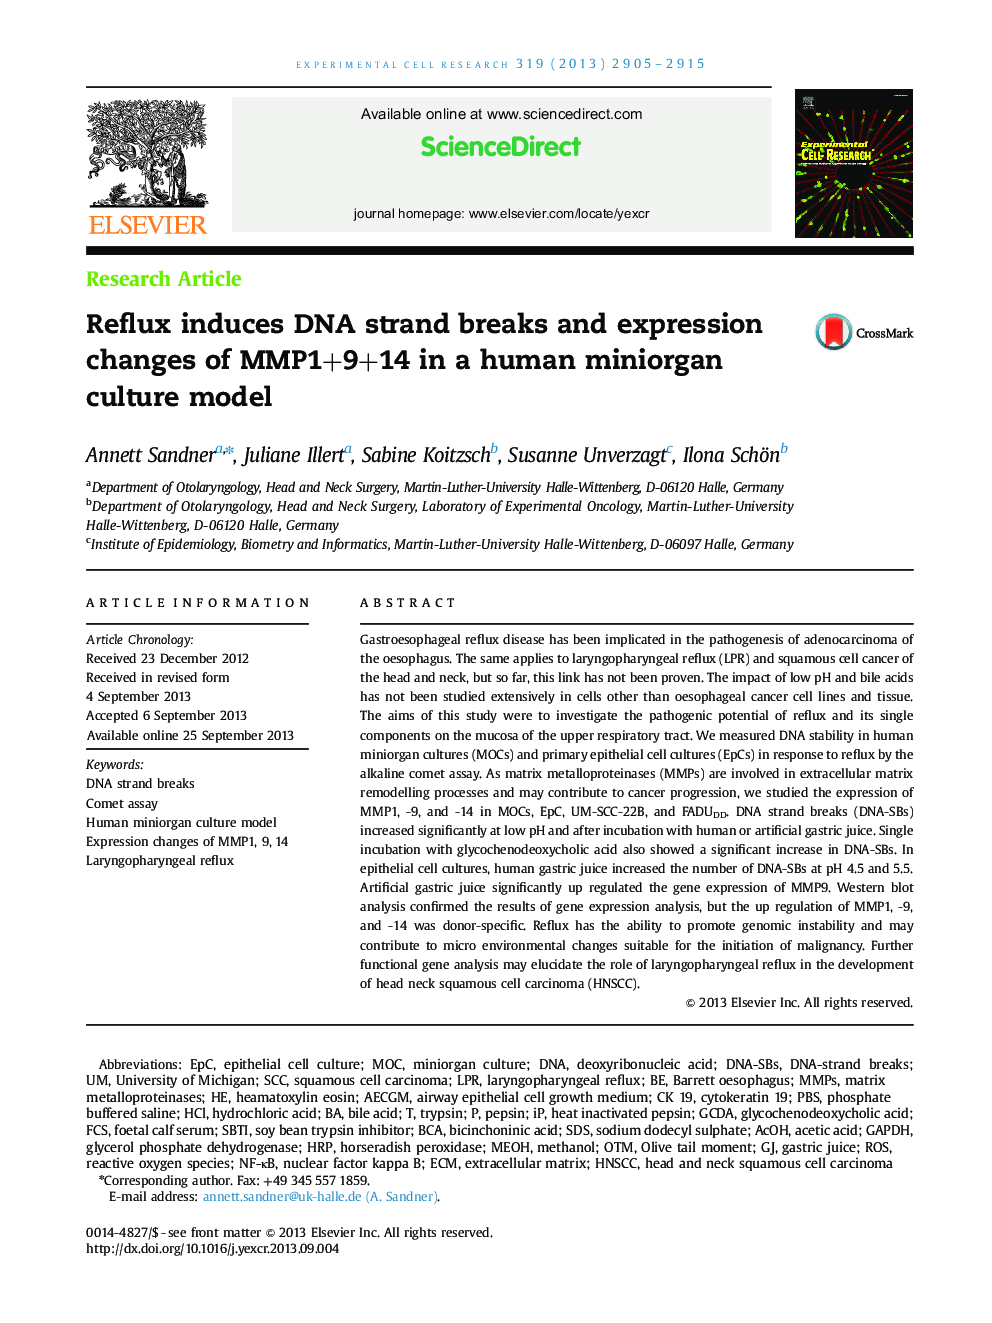 Reflux induces DNA strand breaks and expression changes of MMP1+9+14 in a human miniorgan culture model